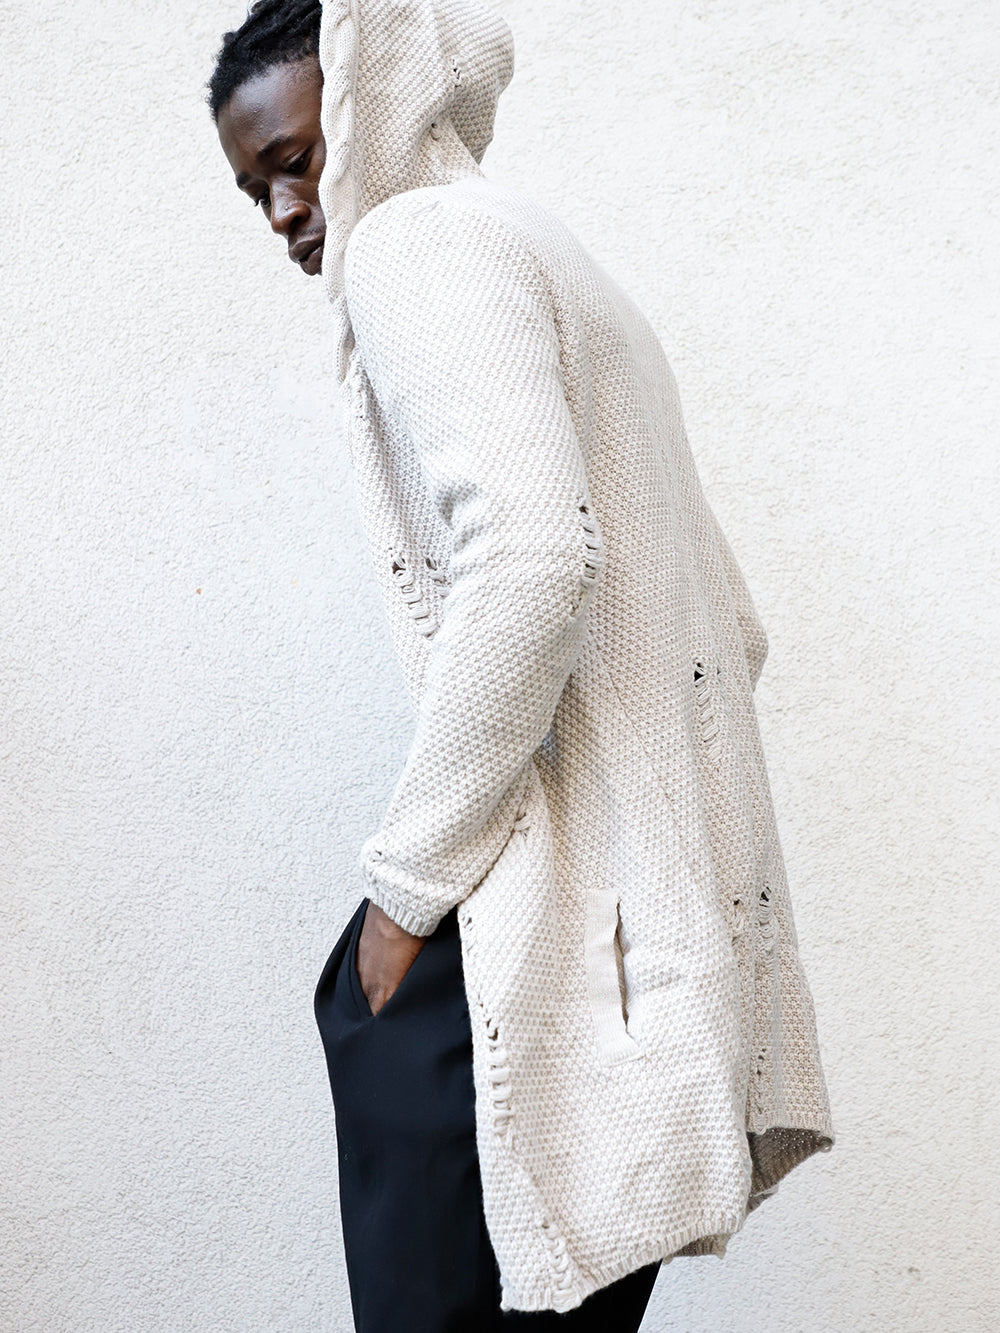 A man in a HOODED DISTRESSED CARDIGAN // STONE standing next to a wall, wearing skinny fit jeans.